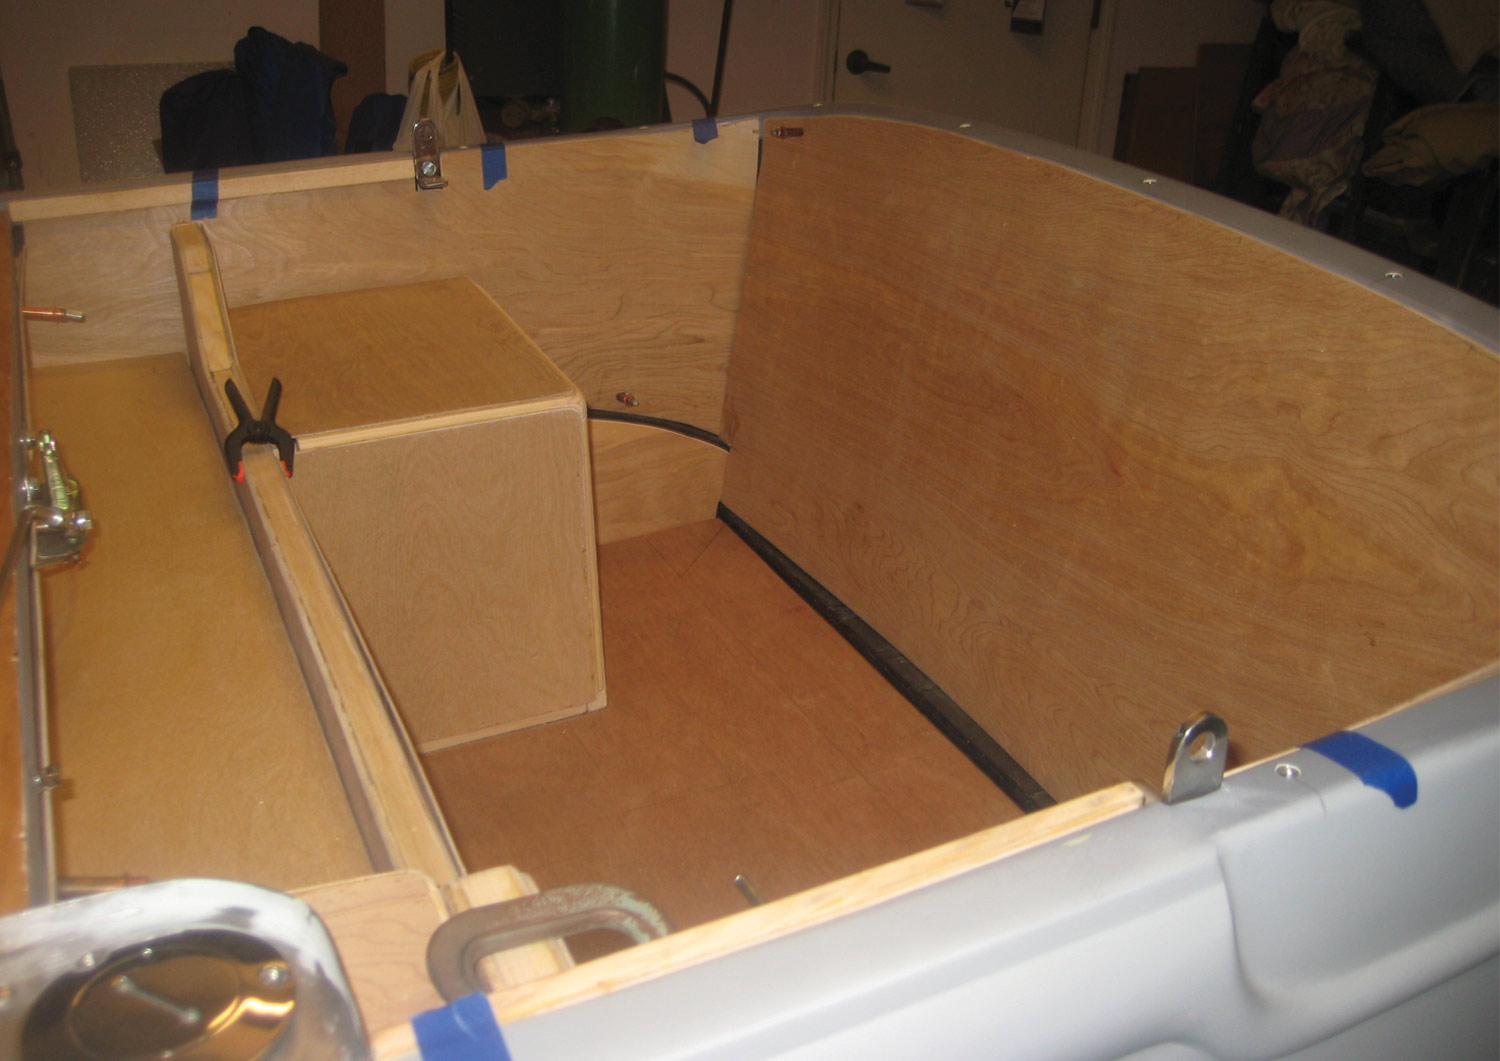 plywood panels run along the inside body of the car in preparation for the upholstery work